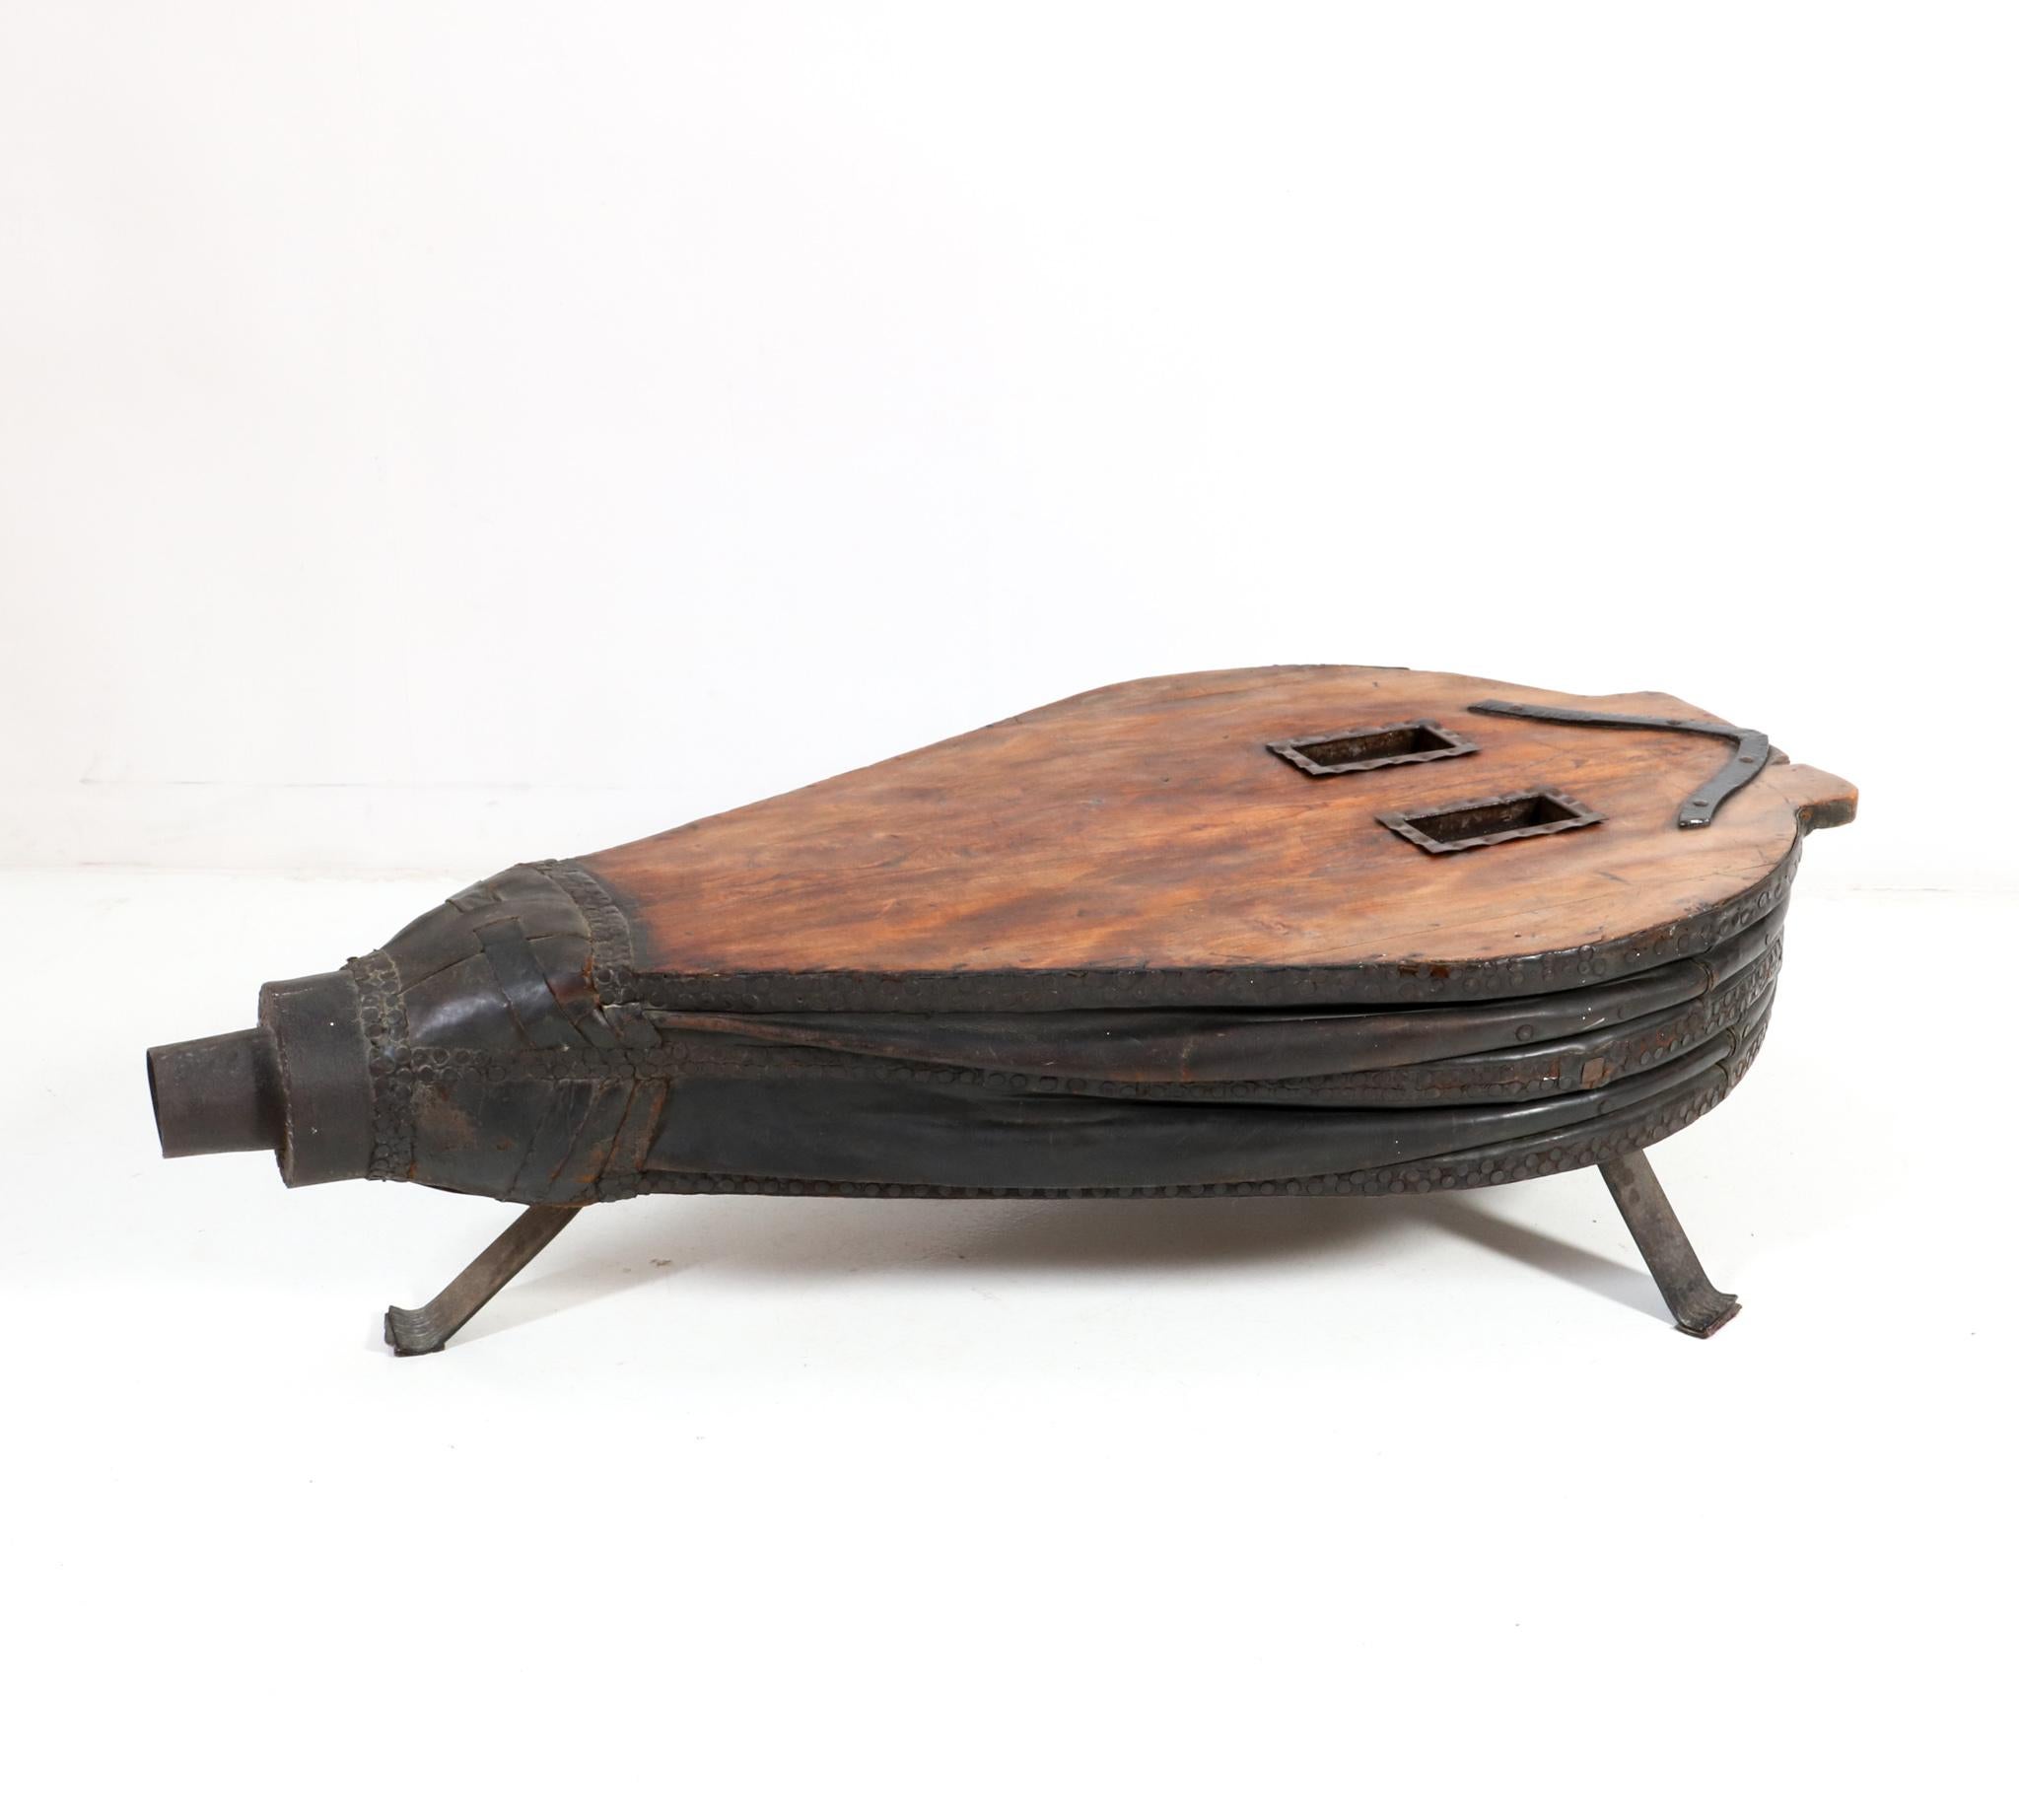 Magnificent and large French Provincial blacksmith forge bellows coffee table.
Striking French design from the 1860s.
Fruitwood and leather top on a custom made wrought iron stand.
This wonderful and highly decorative French Provincial blacksmith